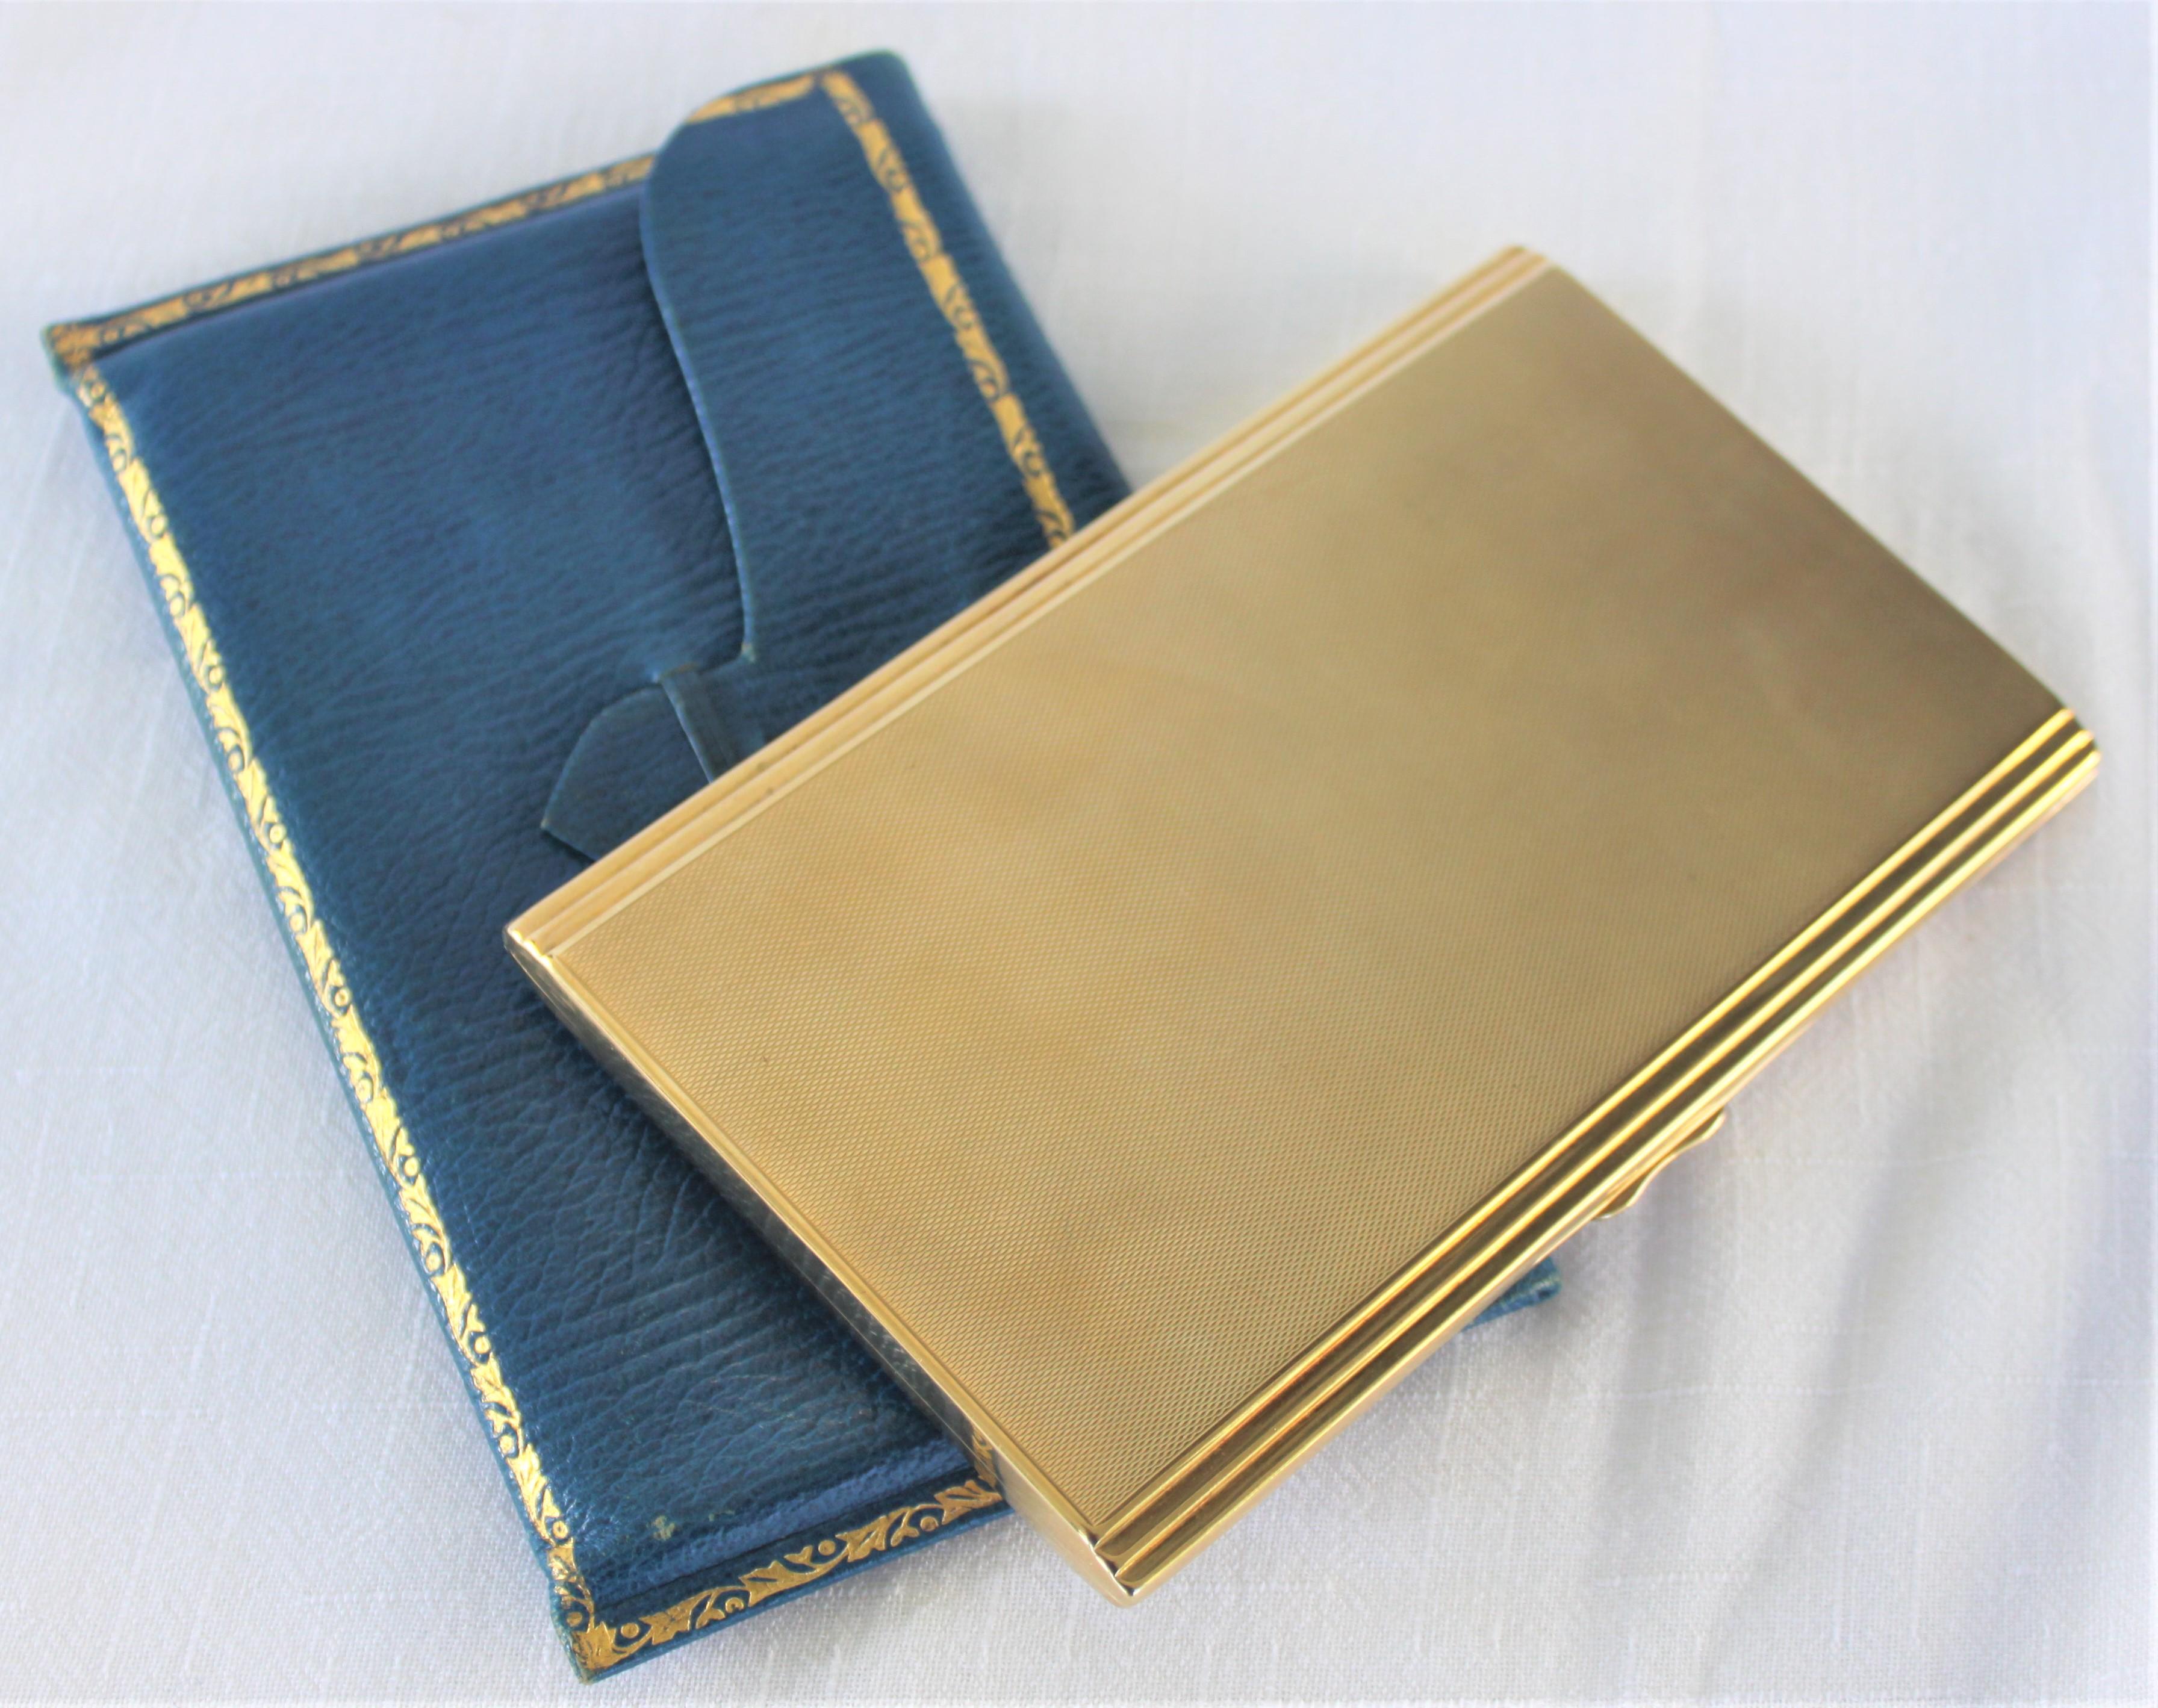 Machine-Made Birks Solid 9-Karat Yellow Gold Cigarette Case with Blue Outer Leather Envelope For Sale